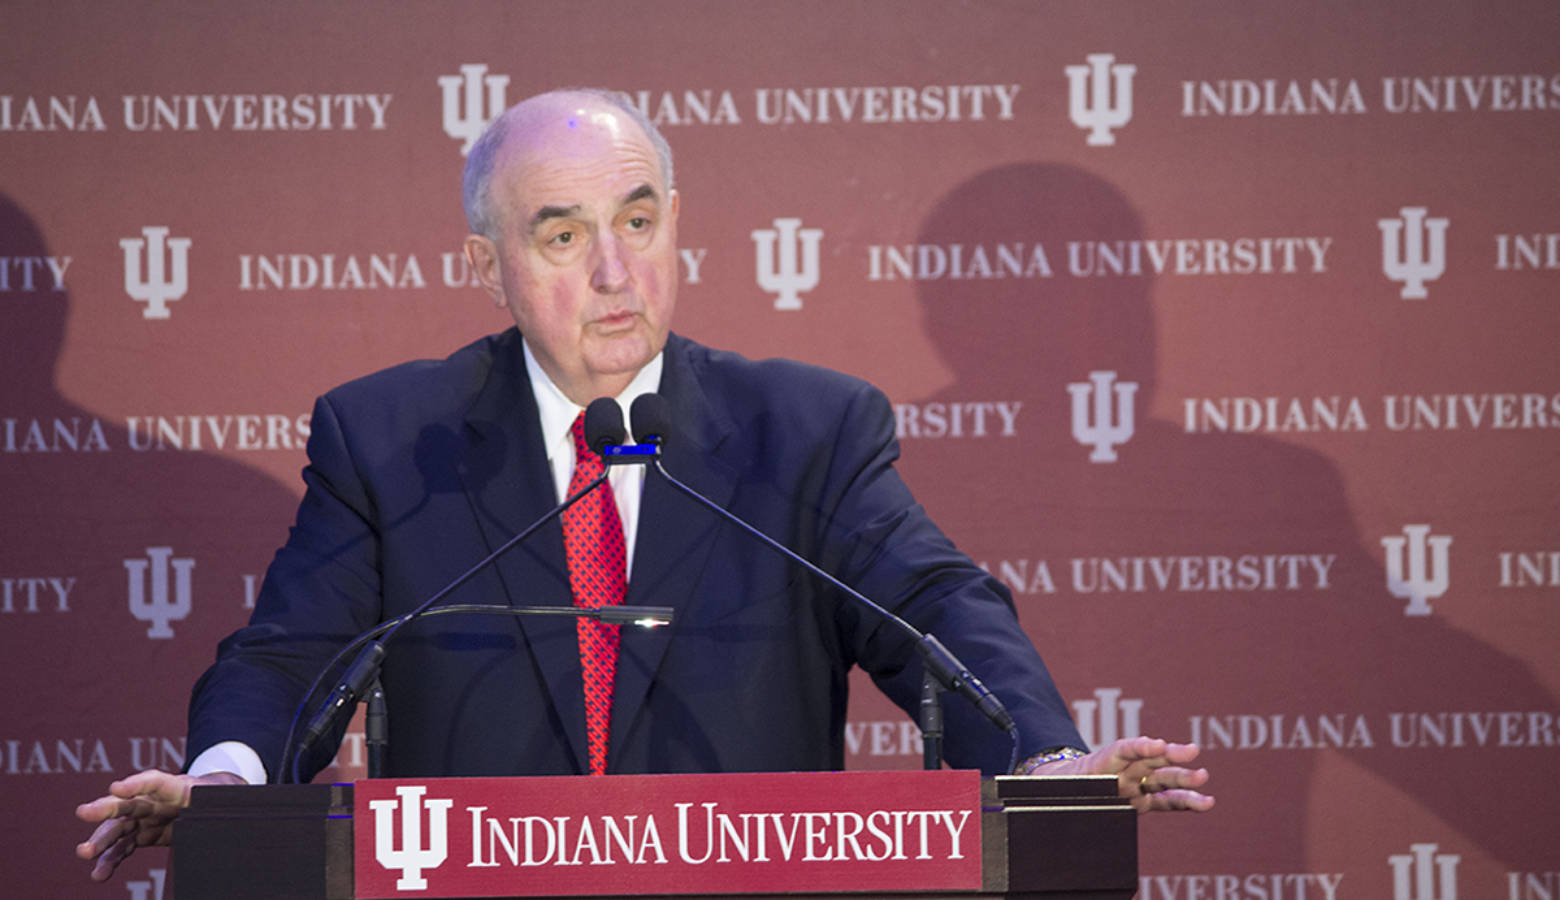 IU President Michael McRobbie announced the initiative in front of program partners at the Indiana State Museum in Indianapolis. (Nick Janzen/ IPB News)